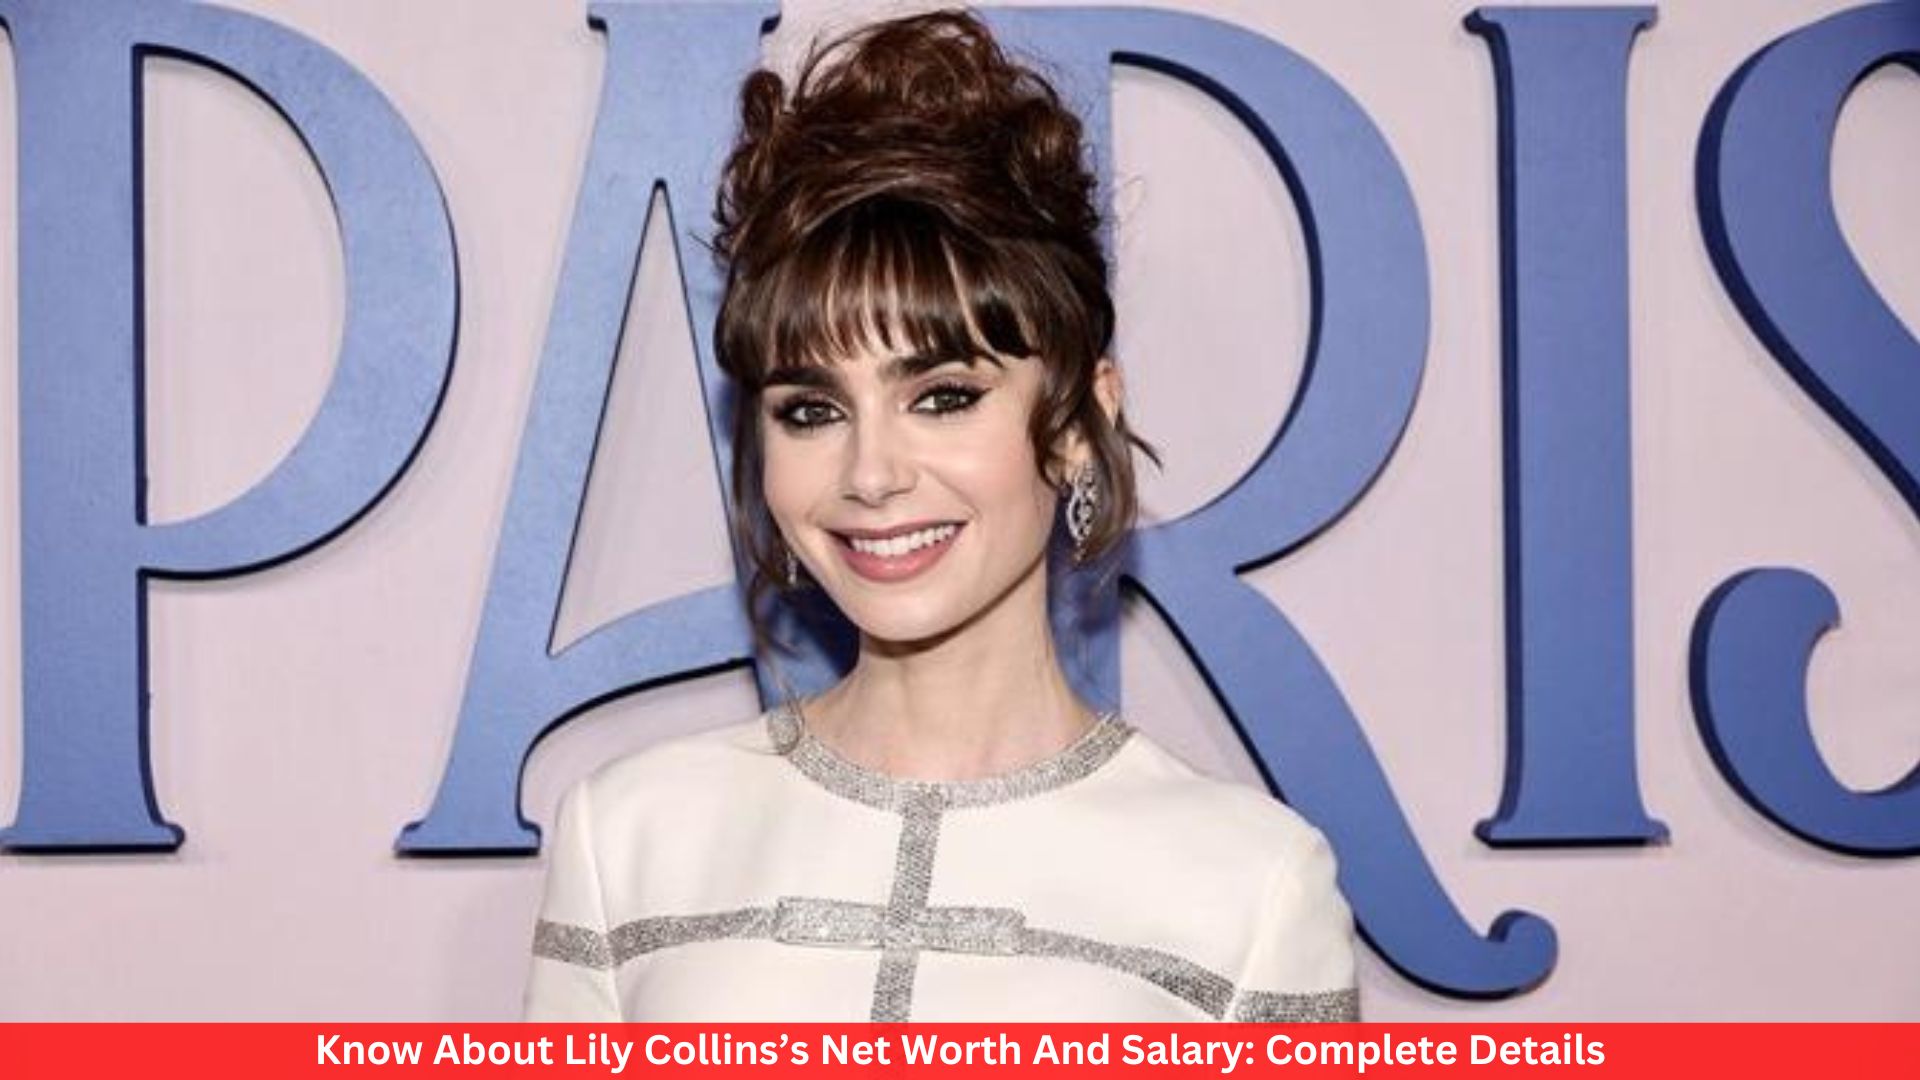 Know About Lily Collins’s Net Worth And Salary: Complete Details